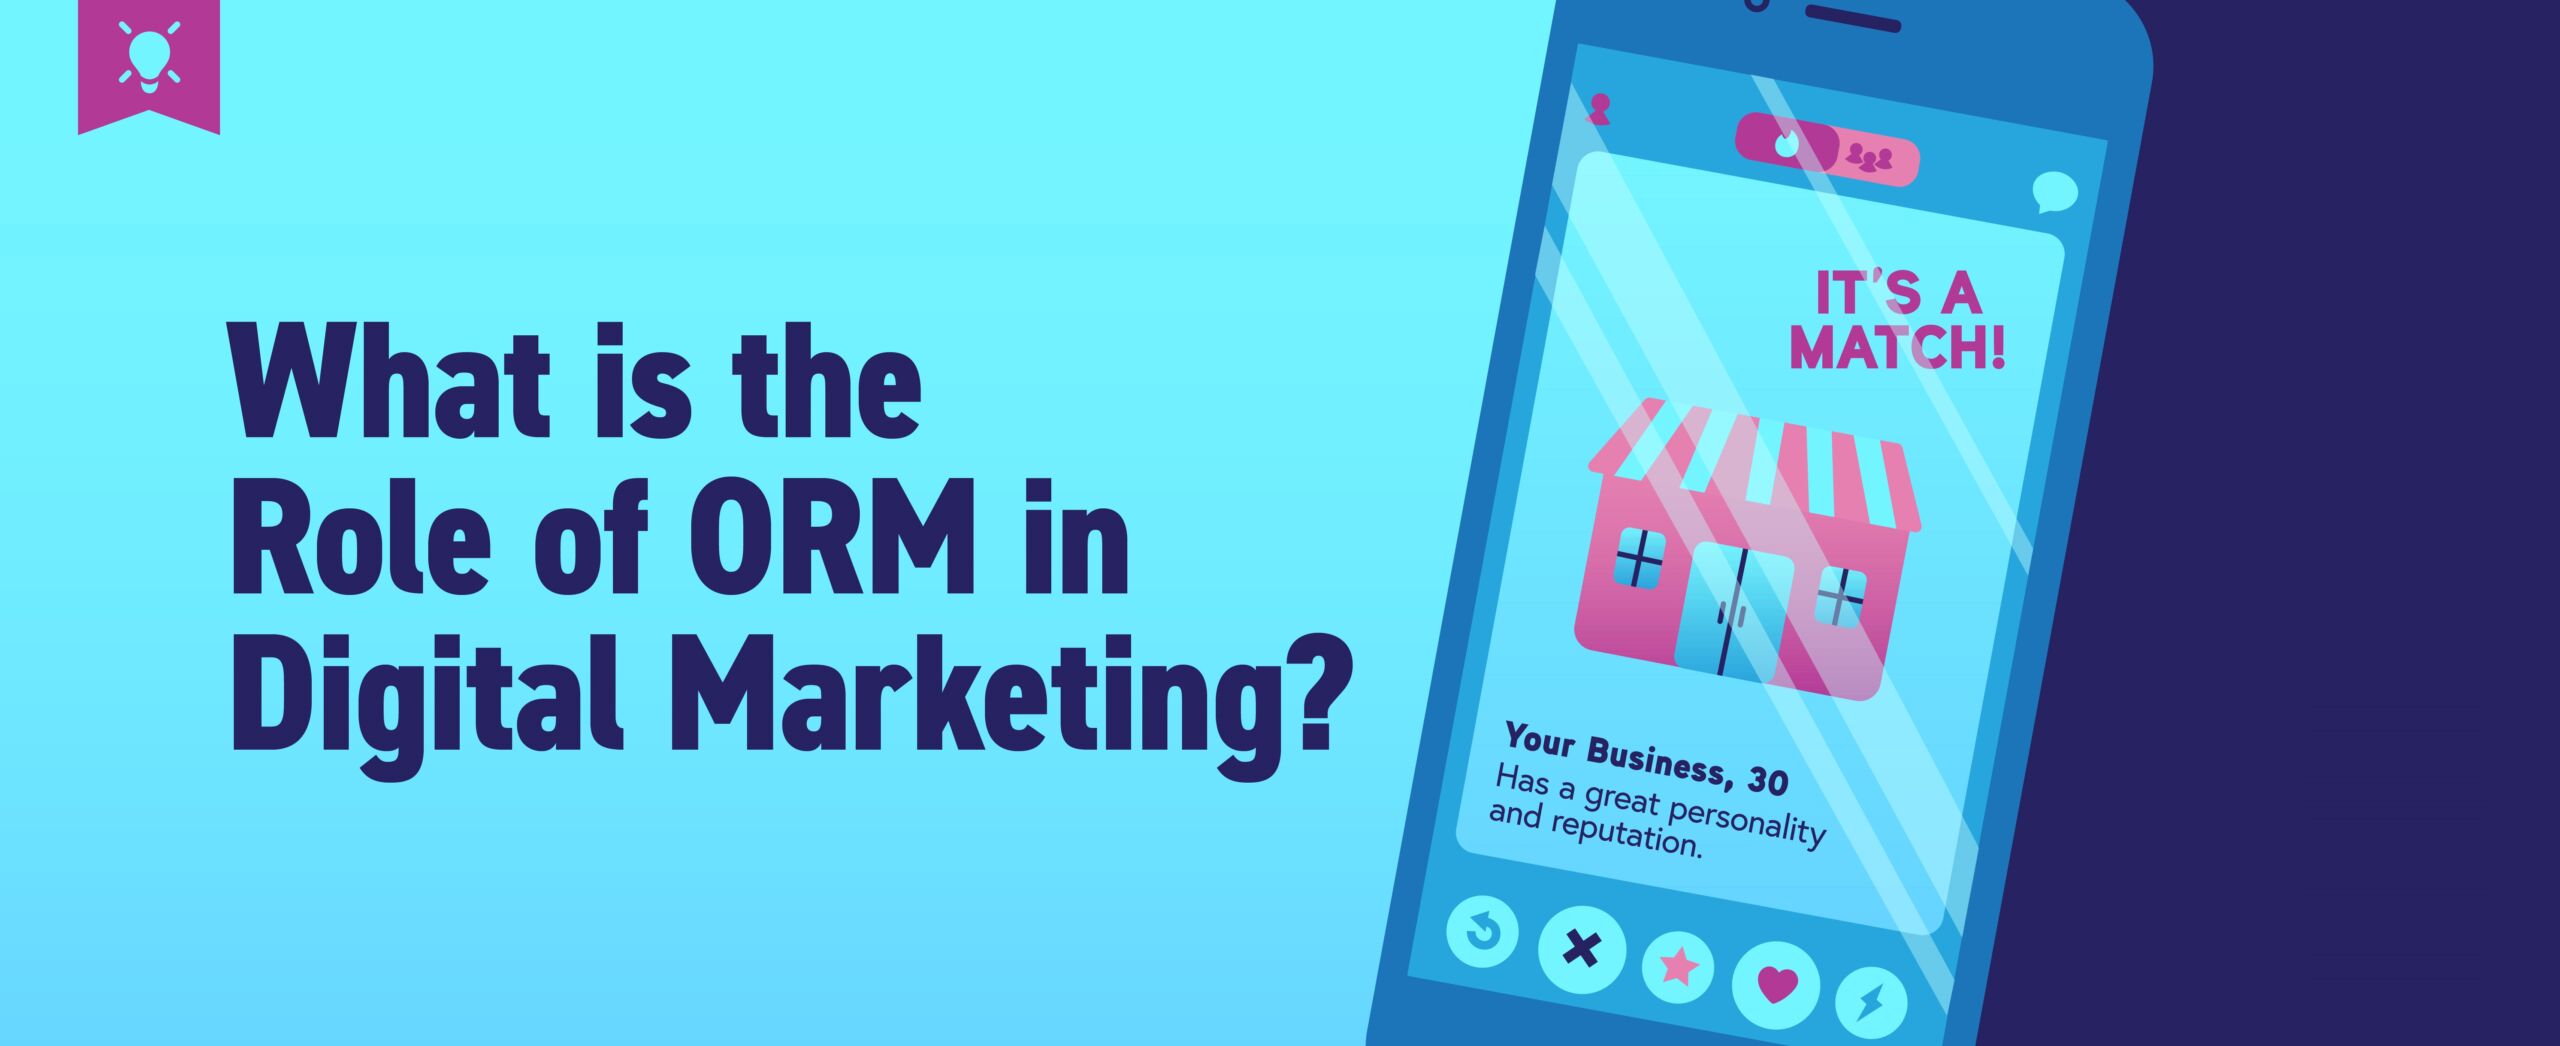 orm full form, orm agency, orm services in india, orm company in india, orm agency in mumbai, orm services in noida, orm services in mumbai, orm company in delhi, orm agency in bangalore, orm company in mumbai, ORM Meaning in Digital Marketing